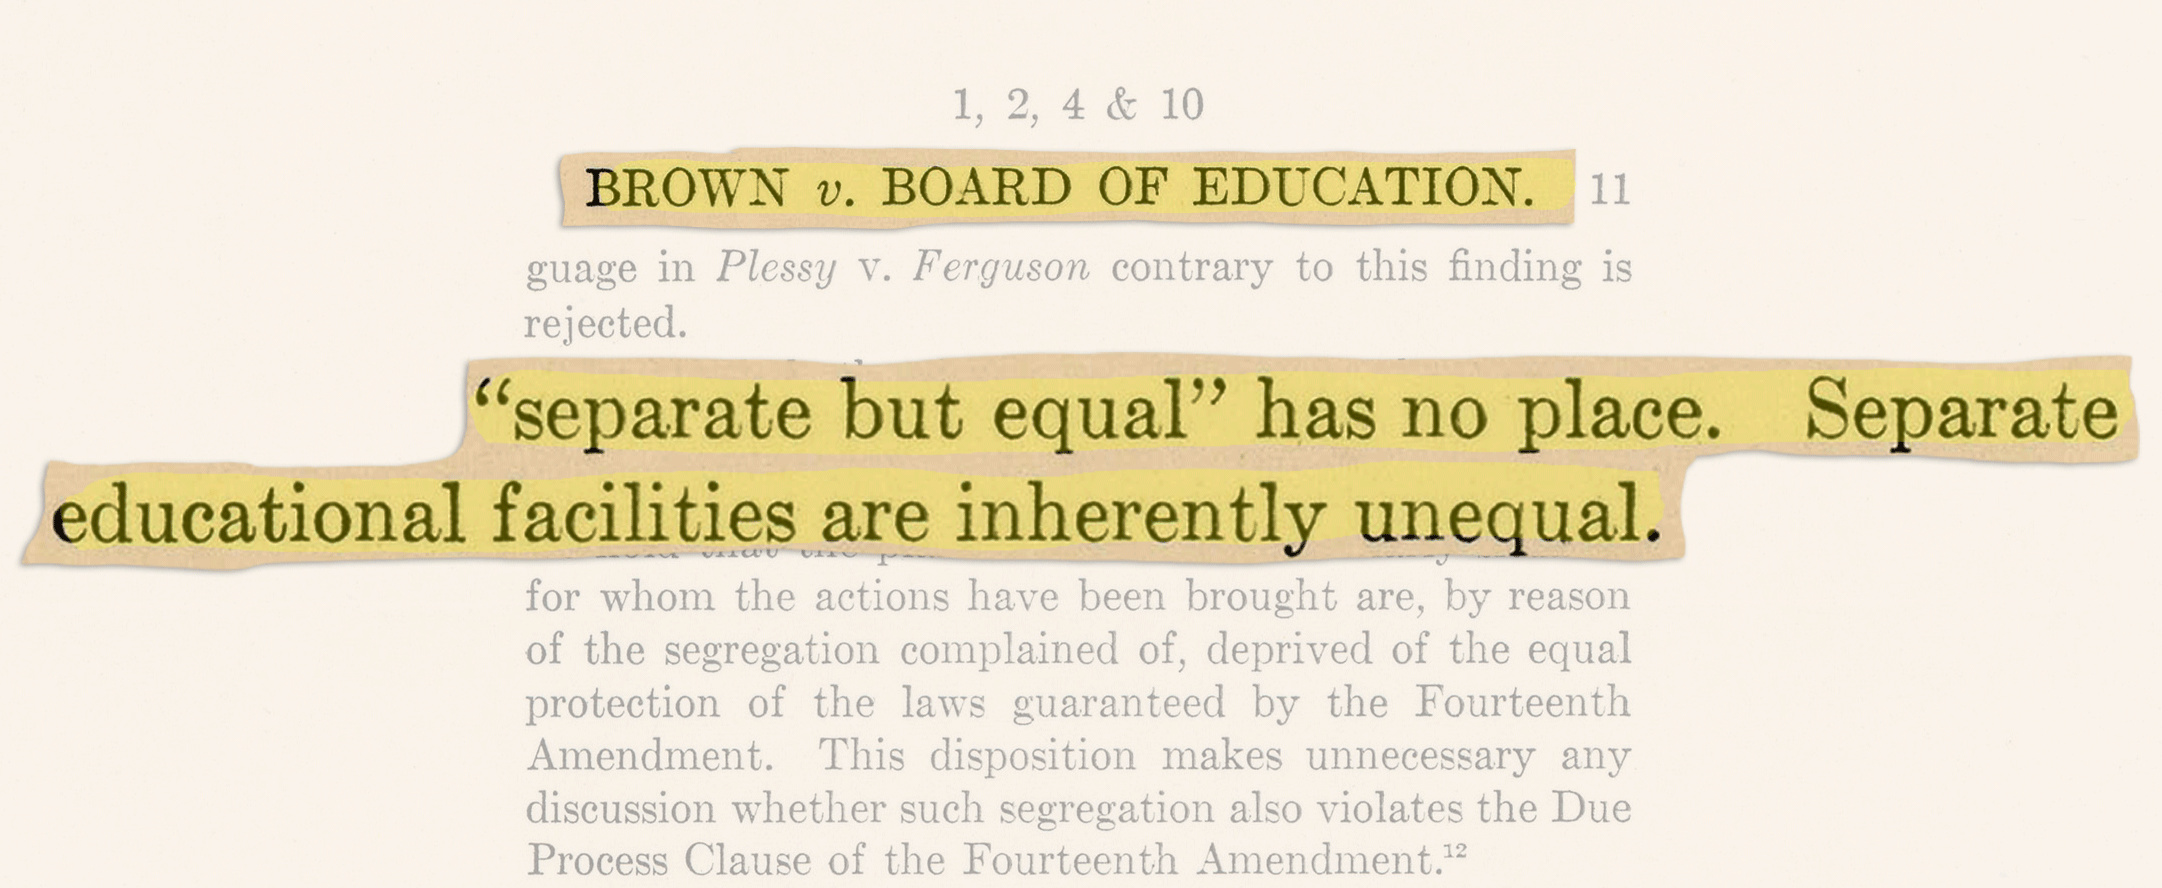 Justice Earl Warren wrote the Supreme Court decision in Brown v. Board of Education: "We conclude that in the field of public education, the doctrine of "separate but equal" has no place. Separate educational facilities are inherently unequal.